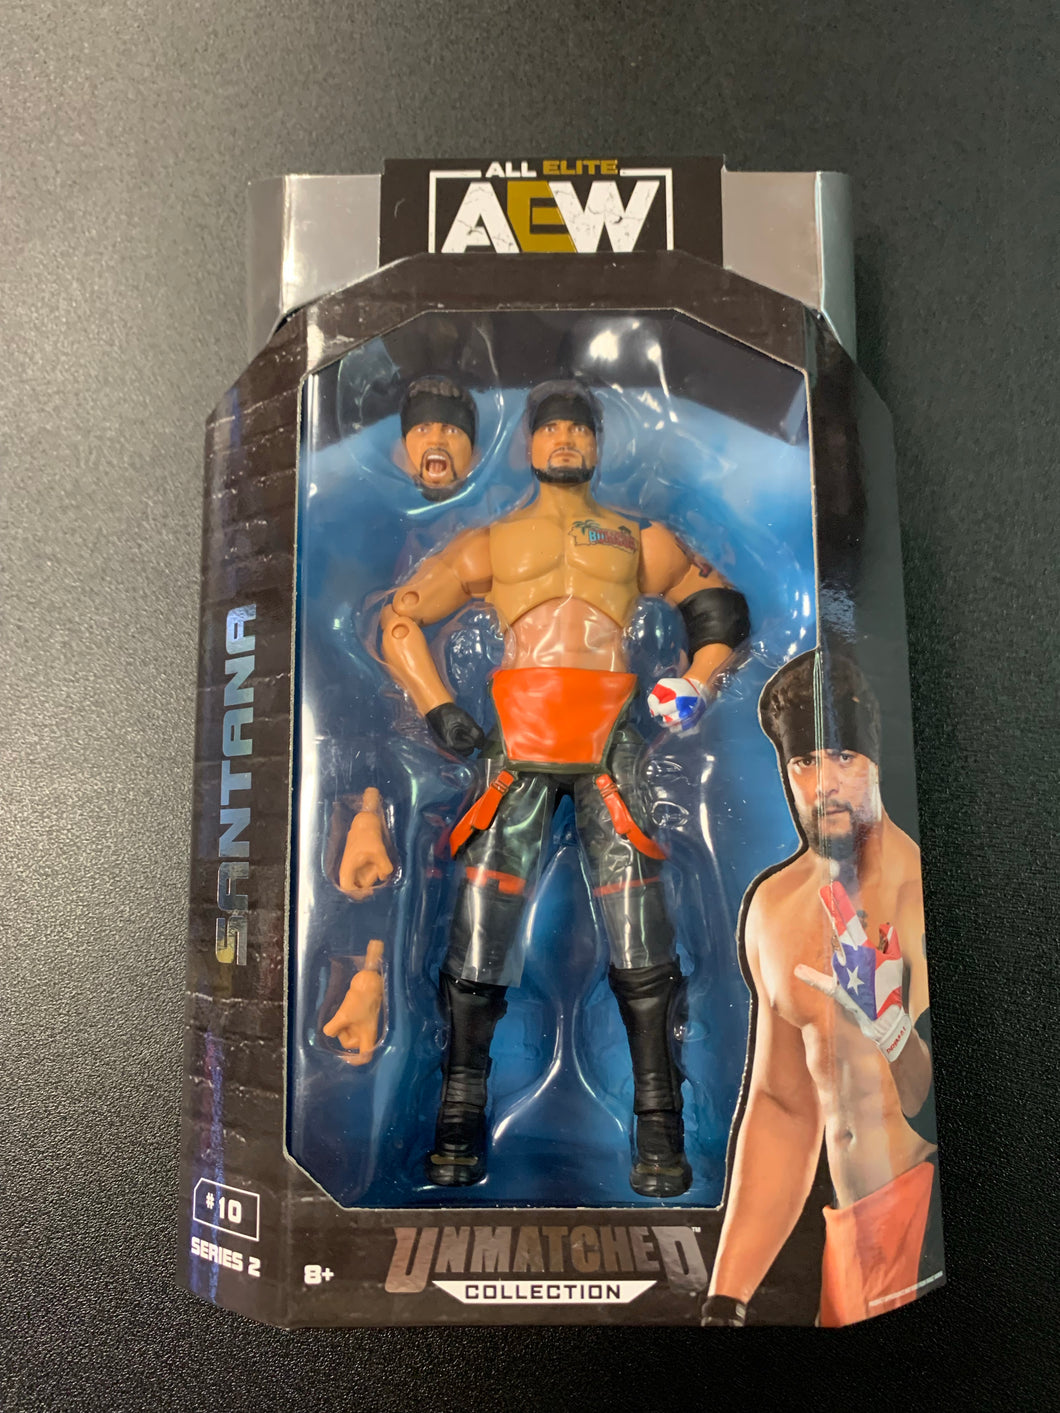 AEW UNMATCHED COLLECTION SANTANA  #10 SERIES 2